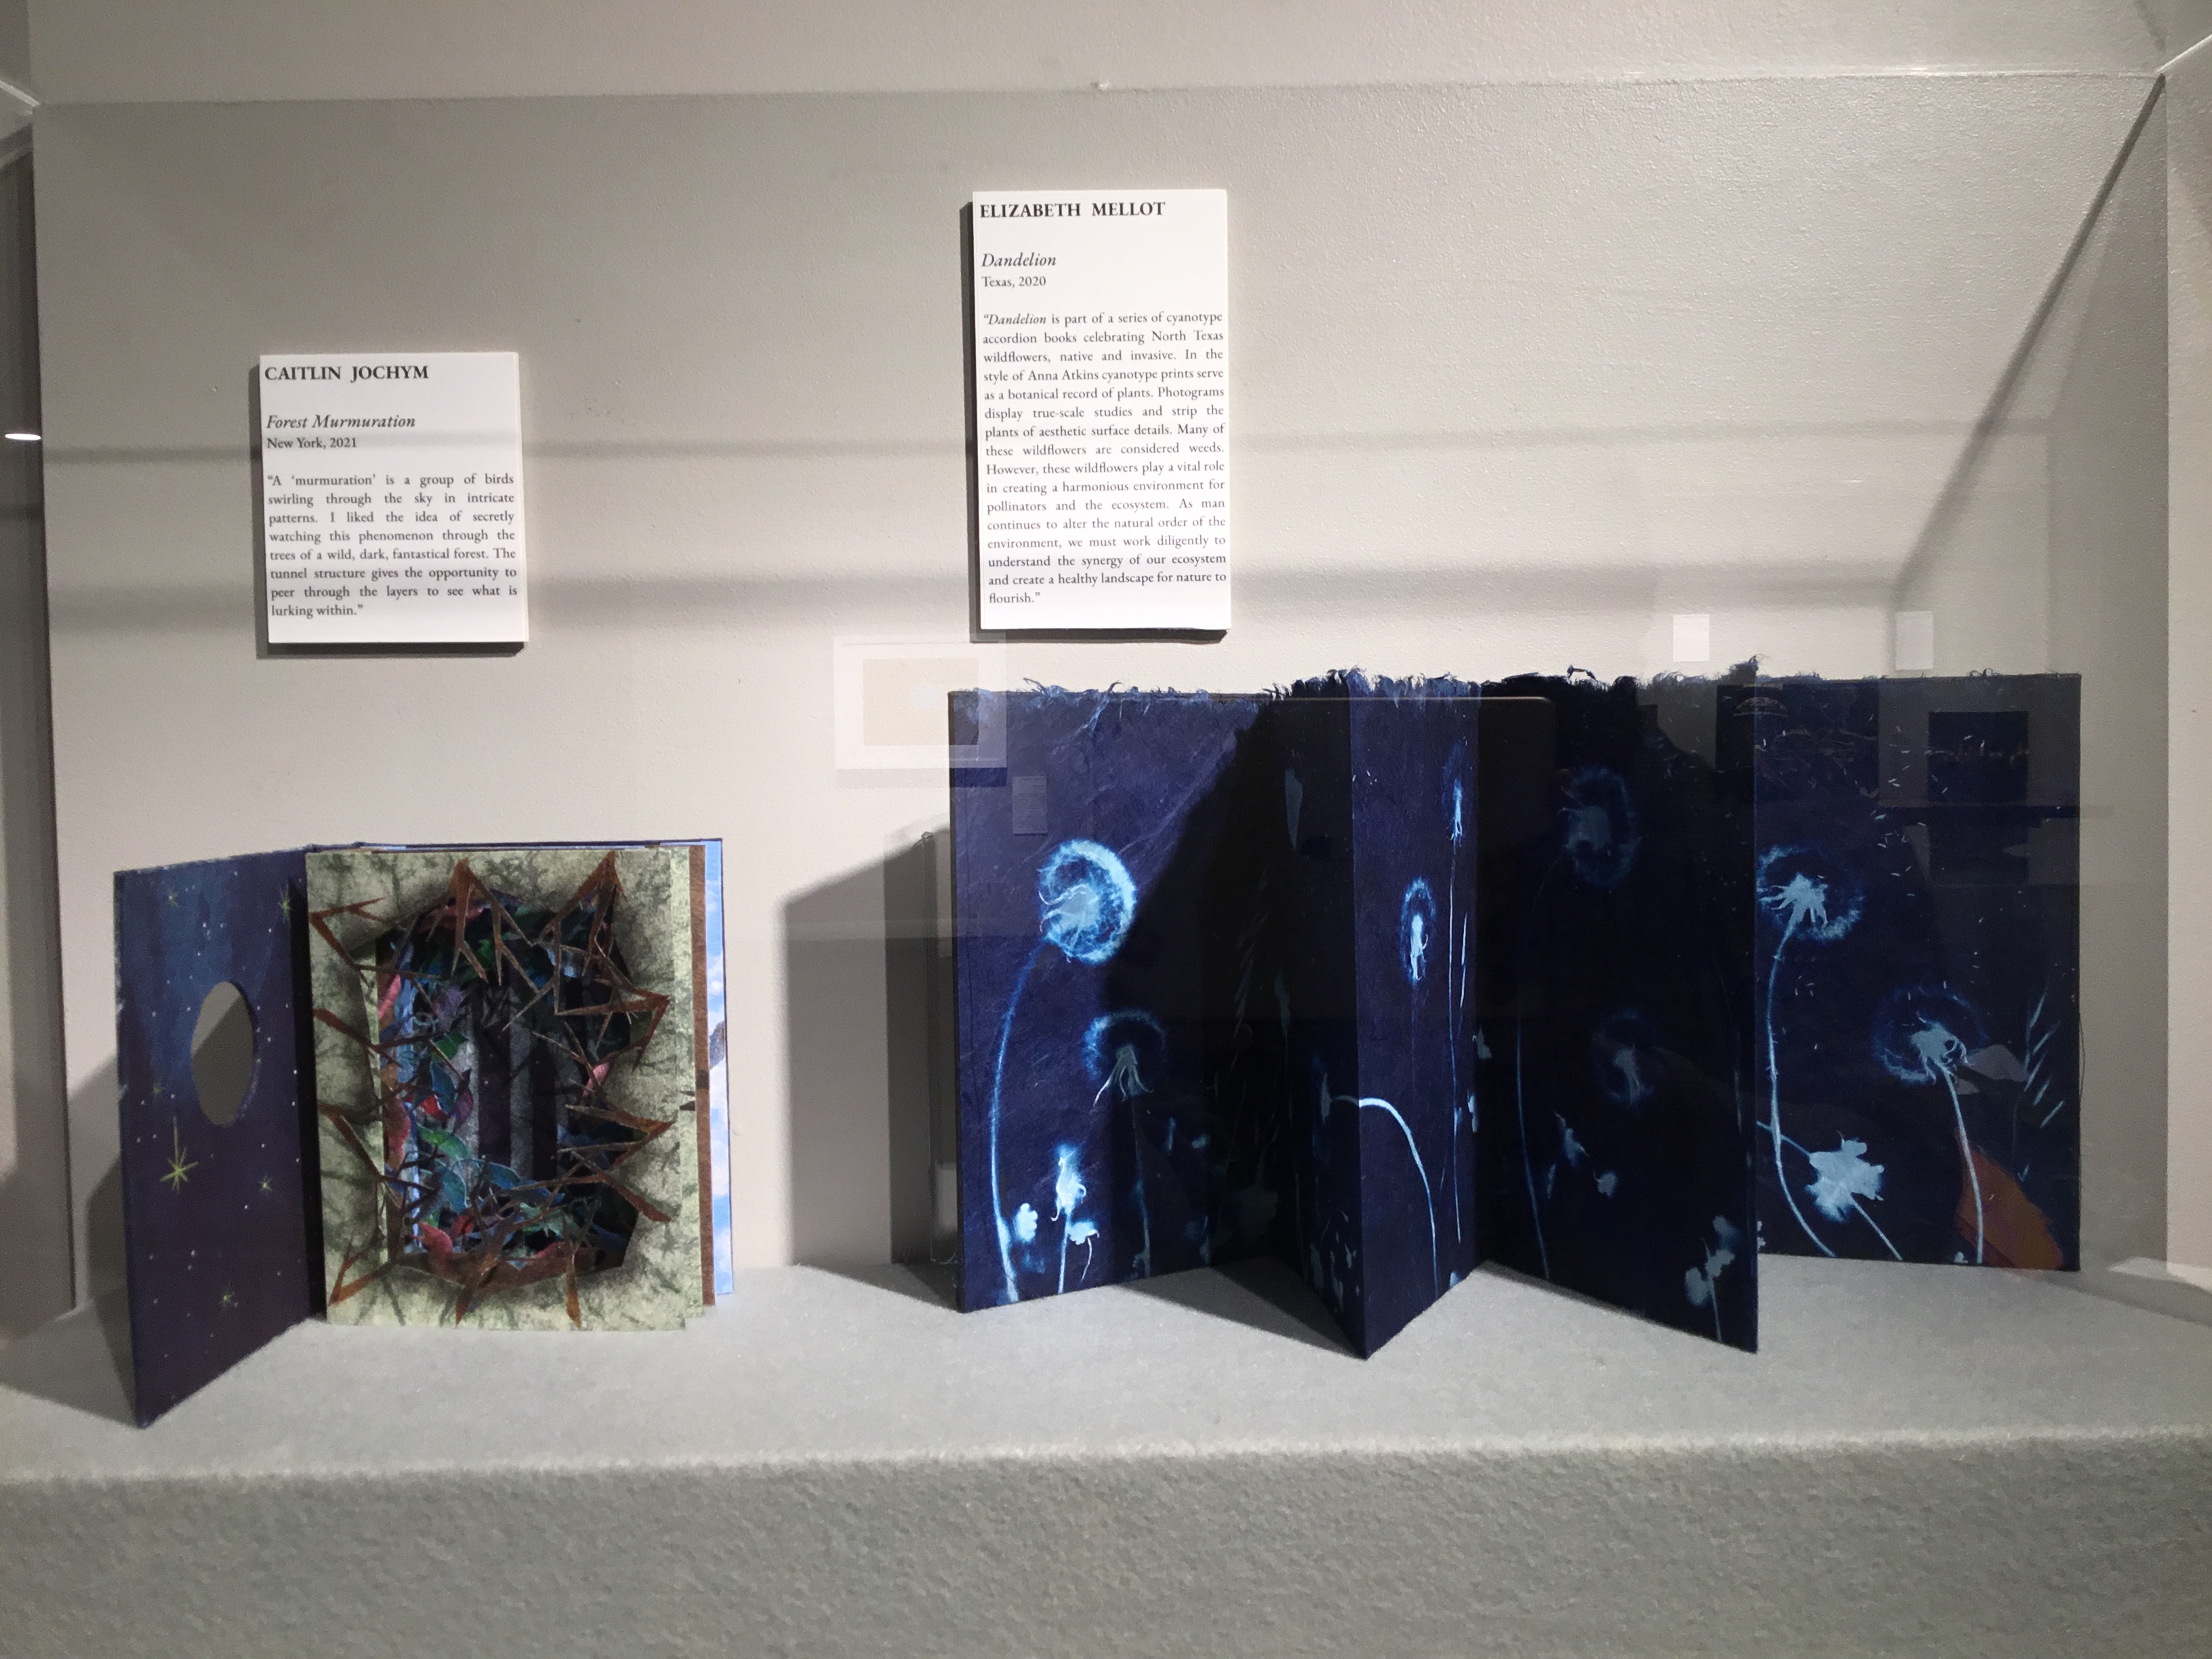 A hanging plexiglass wall case in the small gallery containing two items; a tunnel book with a forest motif and an accordion book with cyanotypes of dandelions.